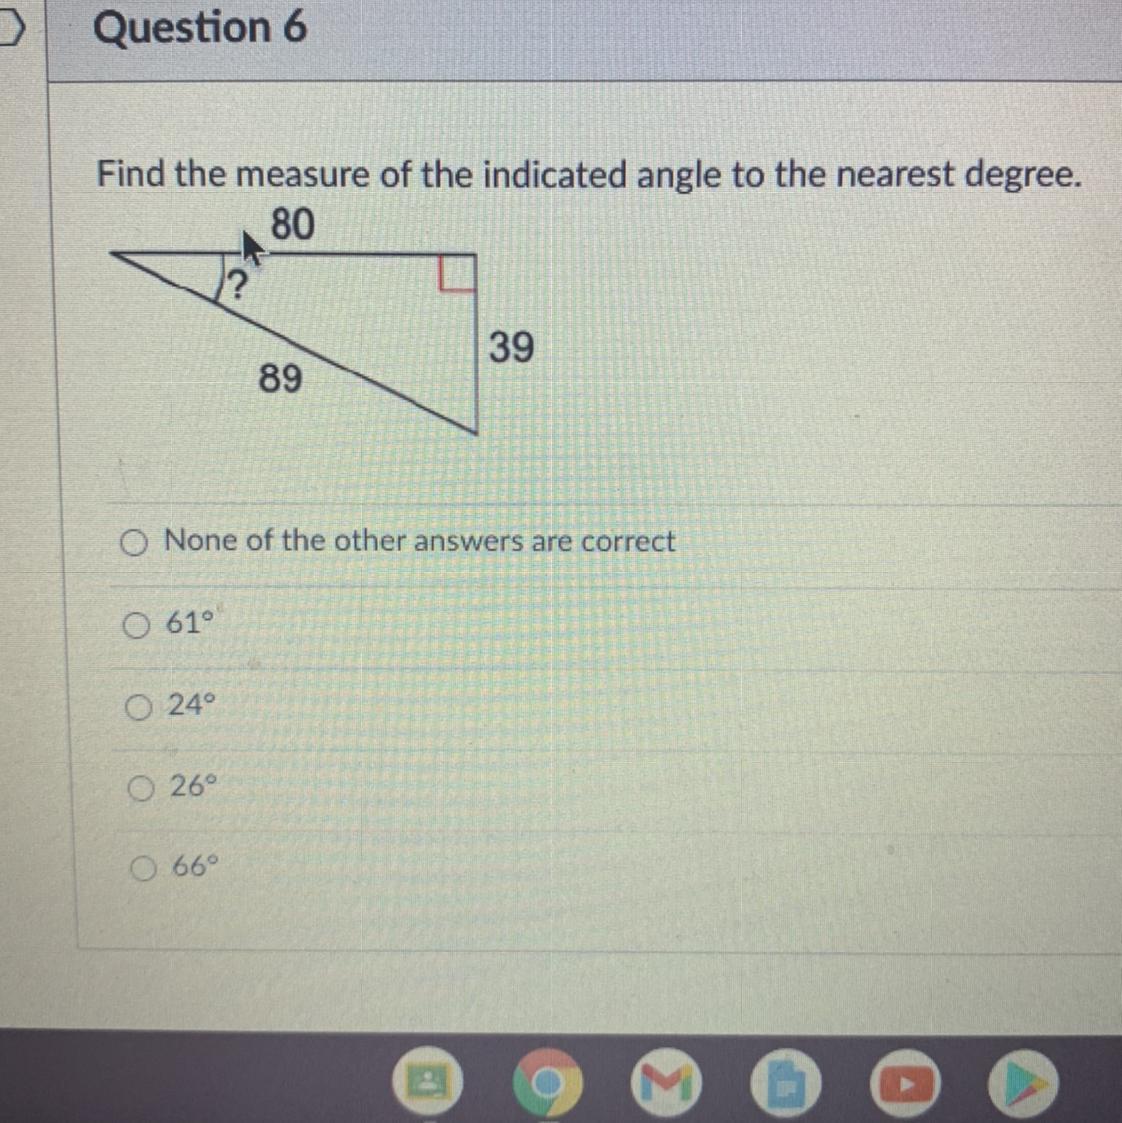 Can Anyone Help Me Out Here !